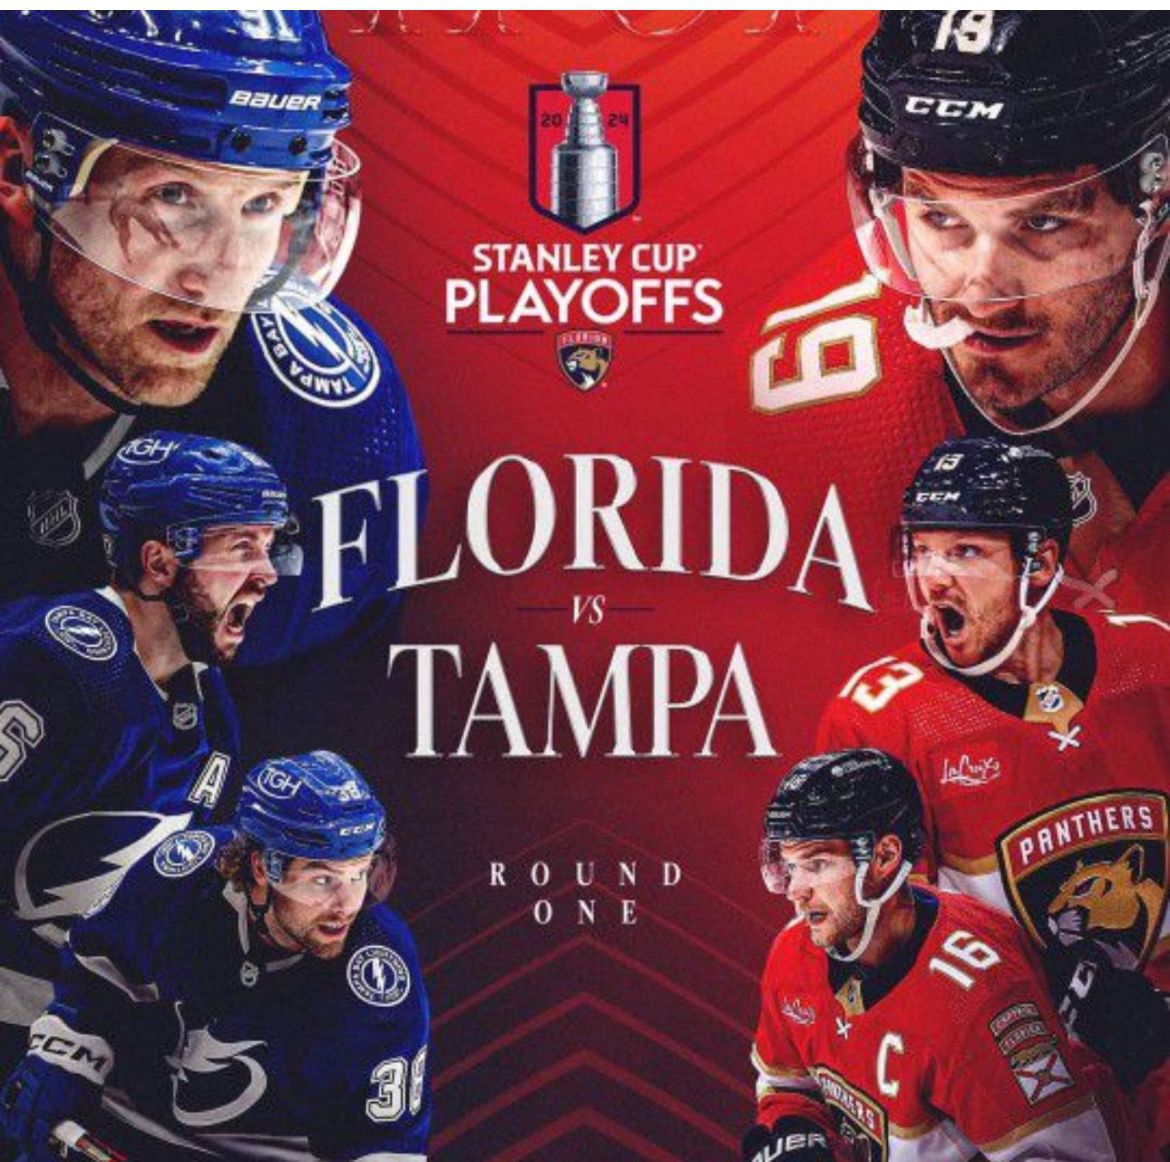 Florida Panthers Versus Tampa Bay Lightning Game Two Tickets $80 Each